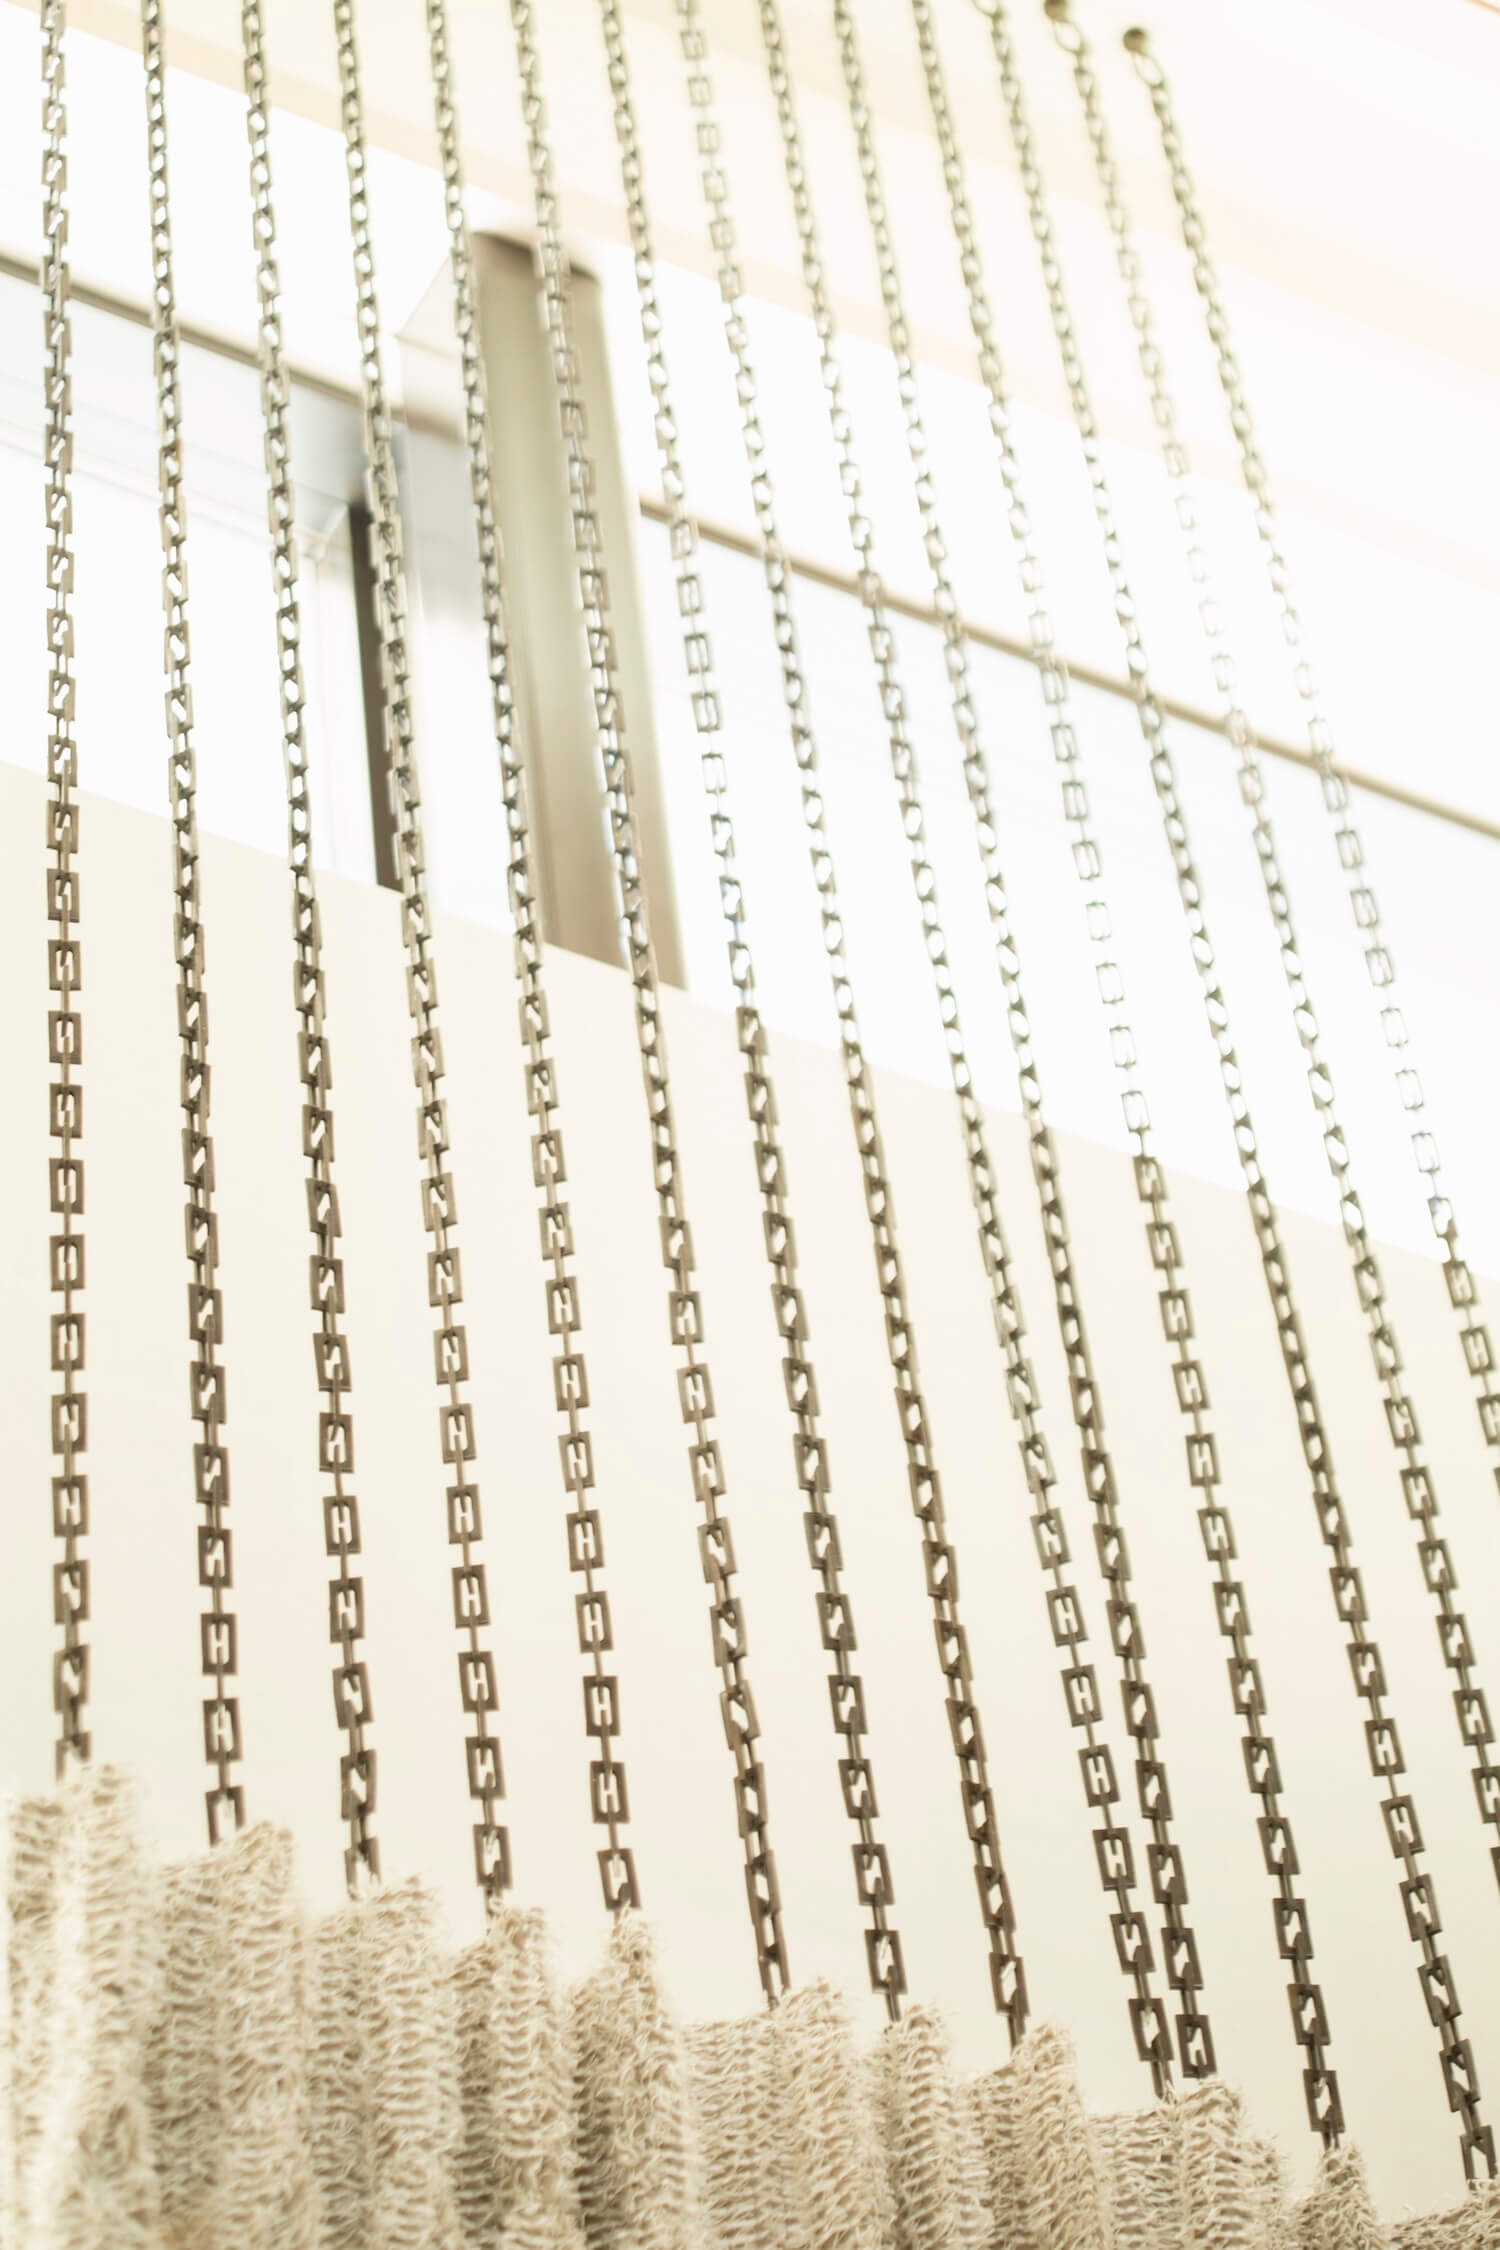 custom bespoke chains suspended from the ceiling are holding custom drapery made of Sahco Textiles